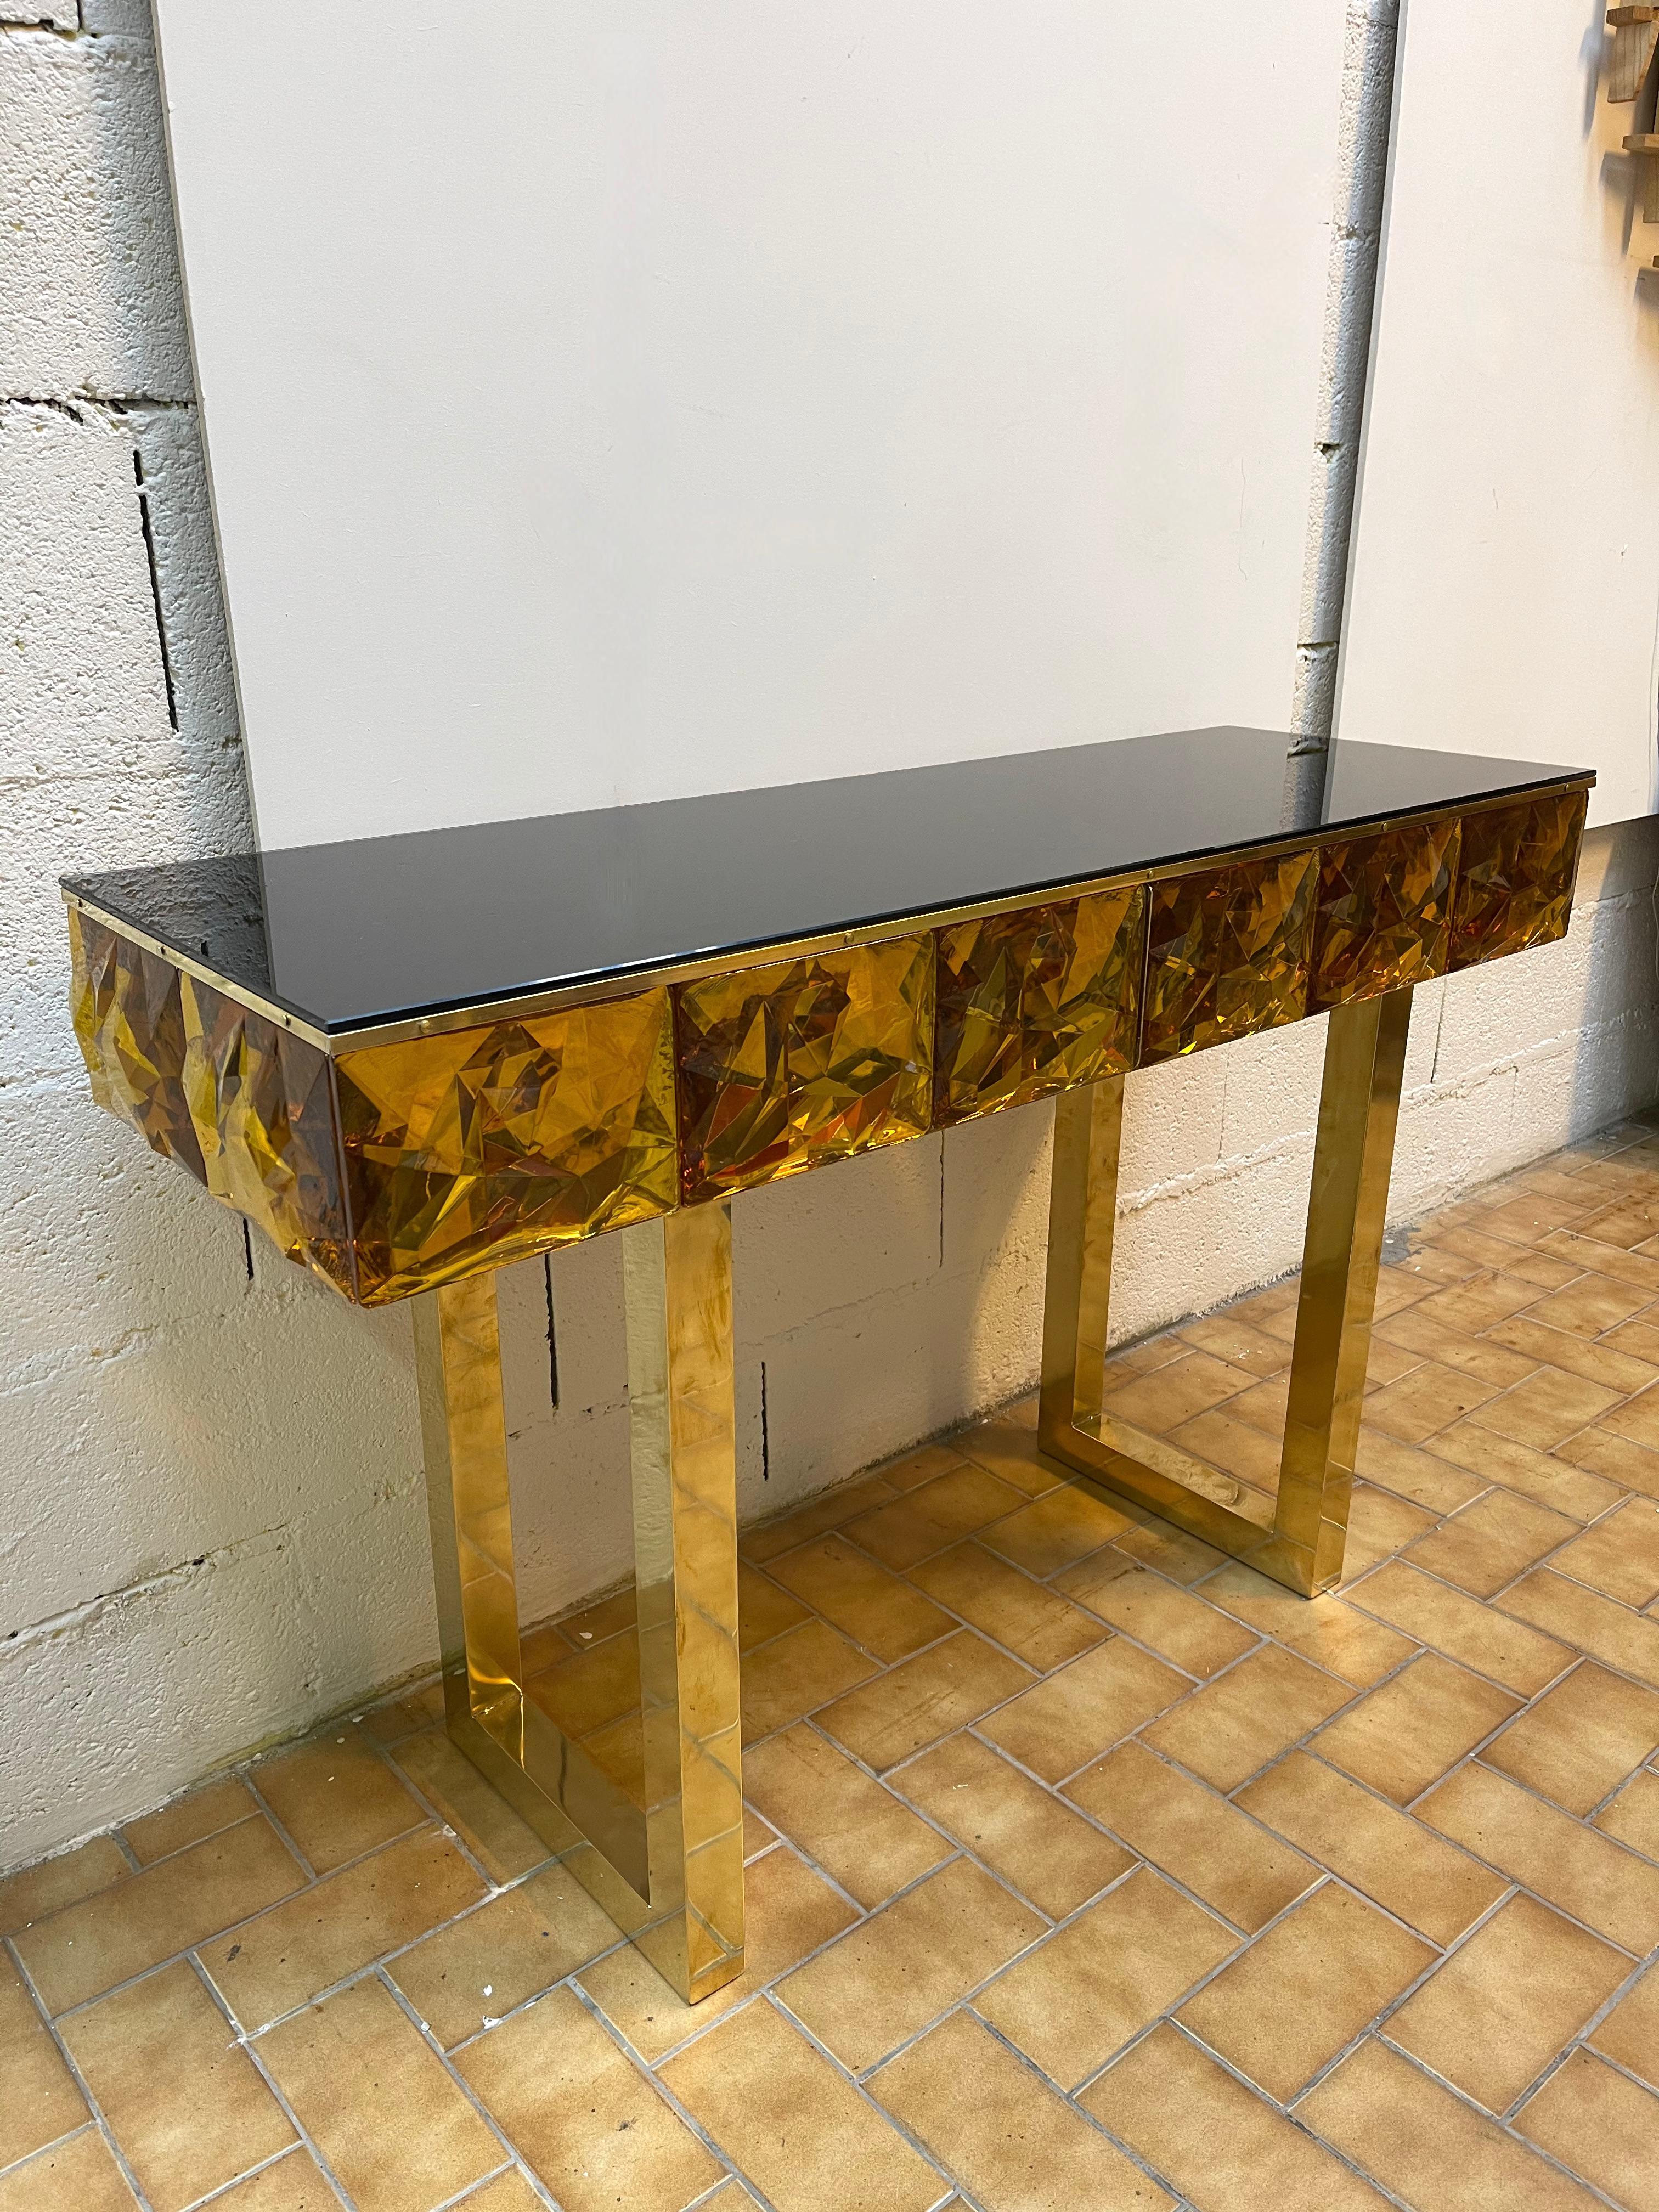 Contemporary console, full brass and large pieces of amber Murano glass with relief diamond point. Black opaline color glass top. Small artisanal workshop. The mirror same model is available.